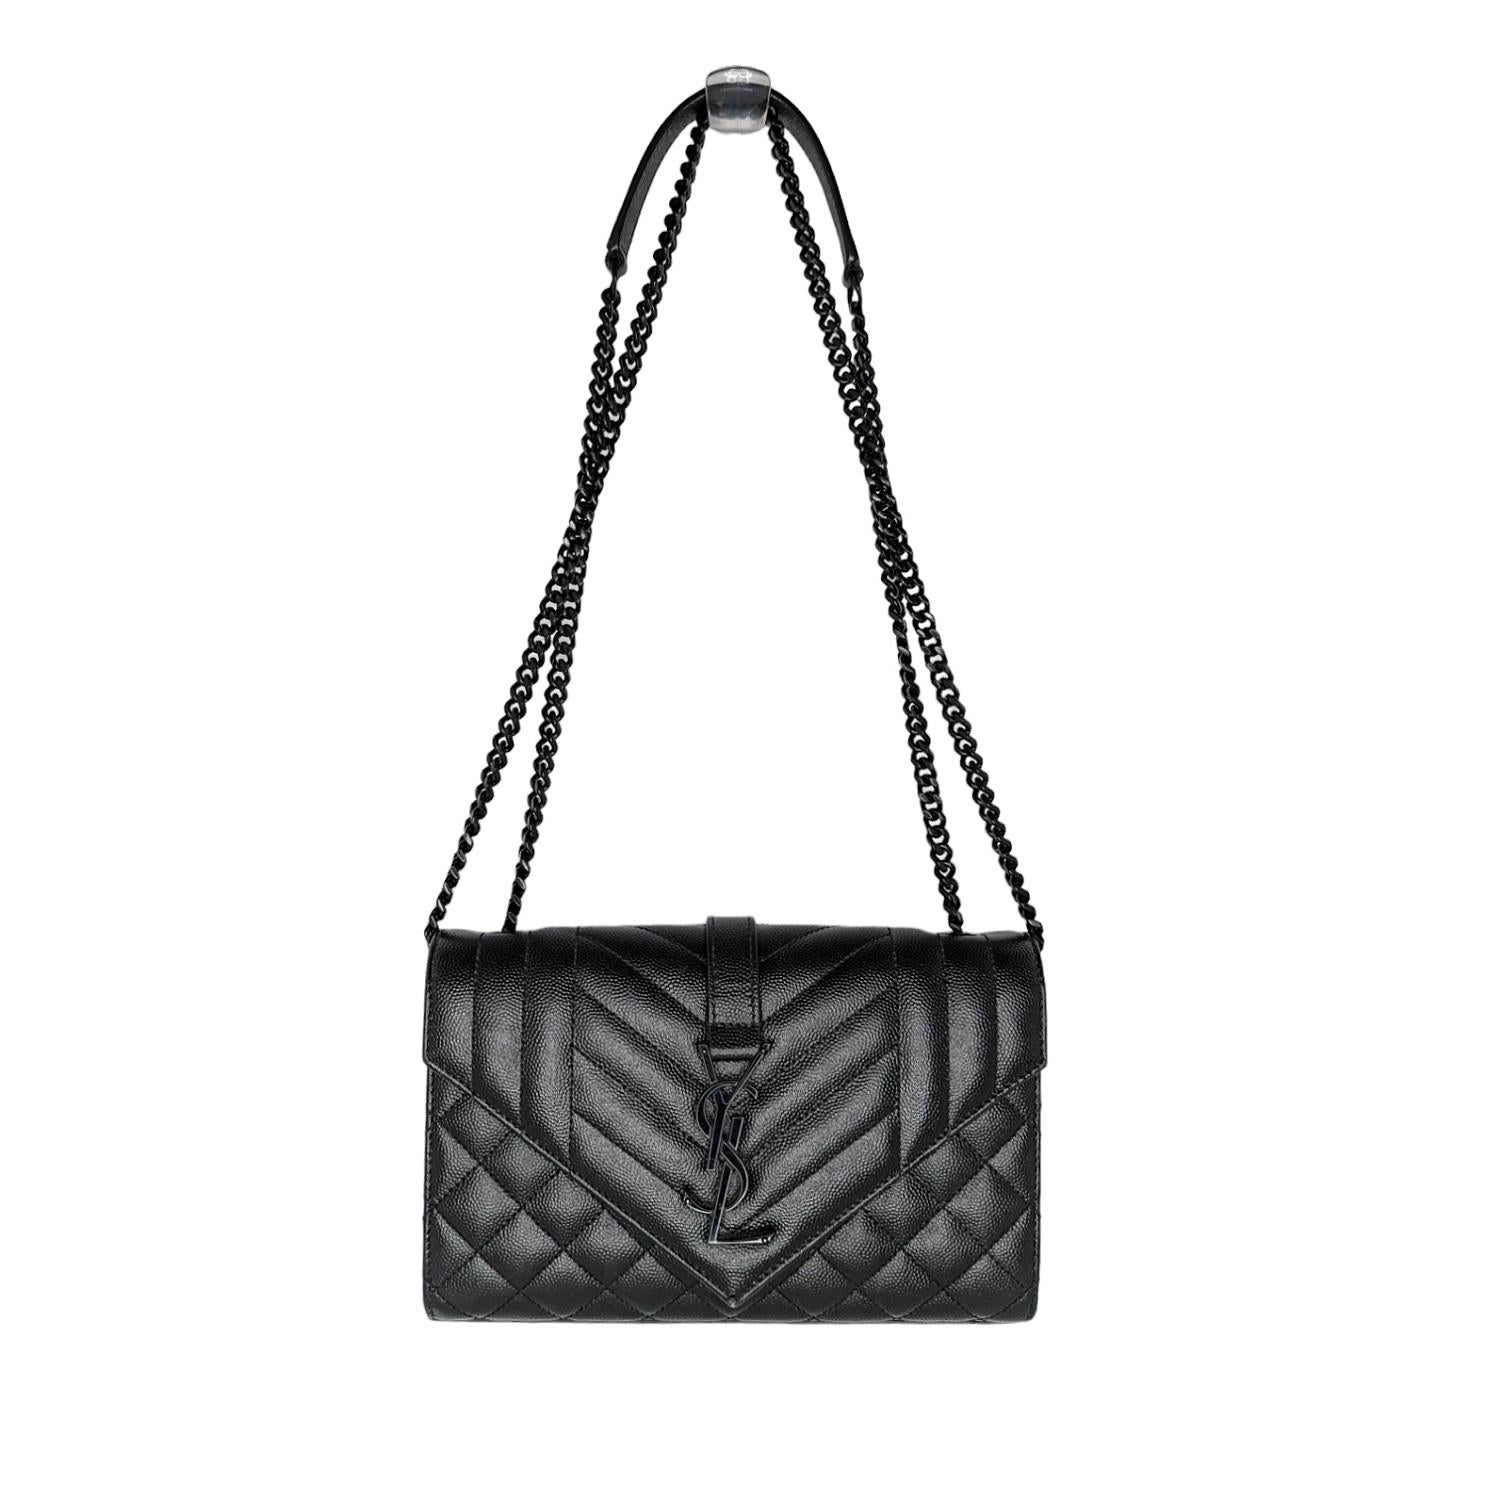 This elegant shoulder bag is crafted of grained leather in black with chevron, linear, and diamond quilting. The bag features a large exterior flat pocket, black chain-link shoulder straps with a leather shoulder pad and an envelope style flap with